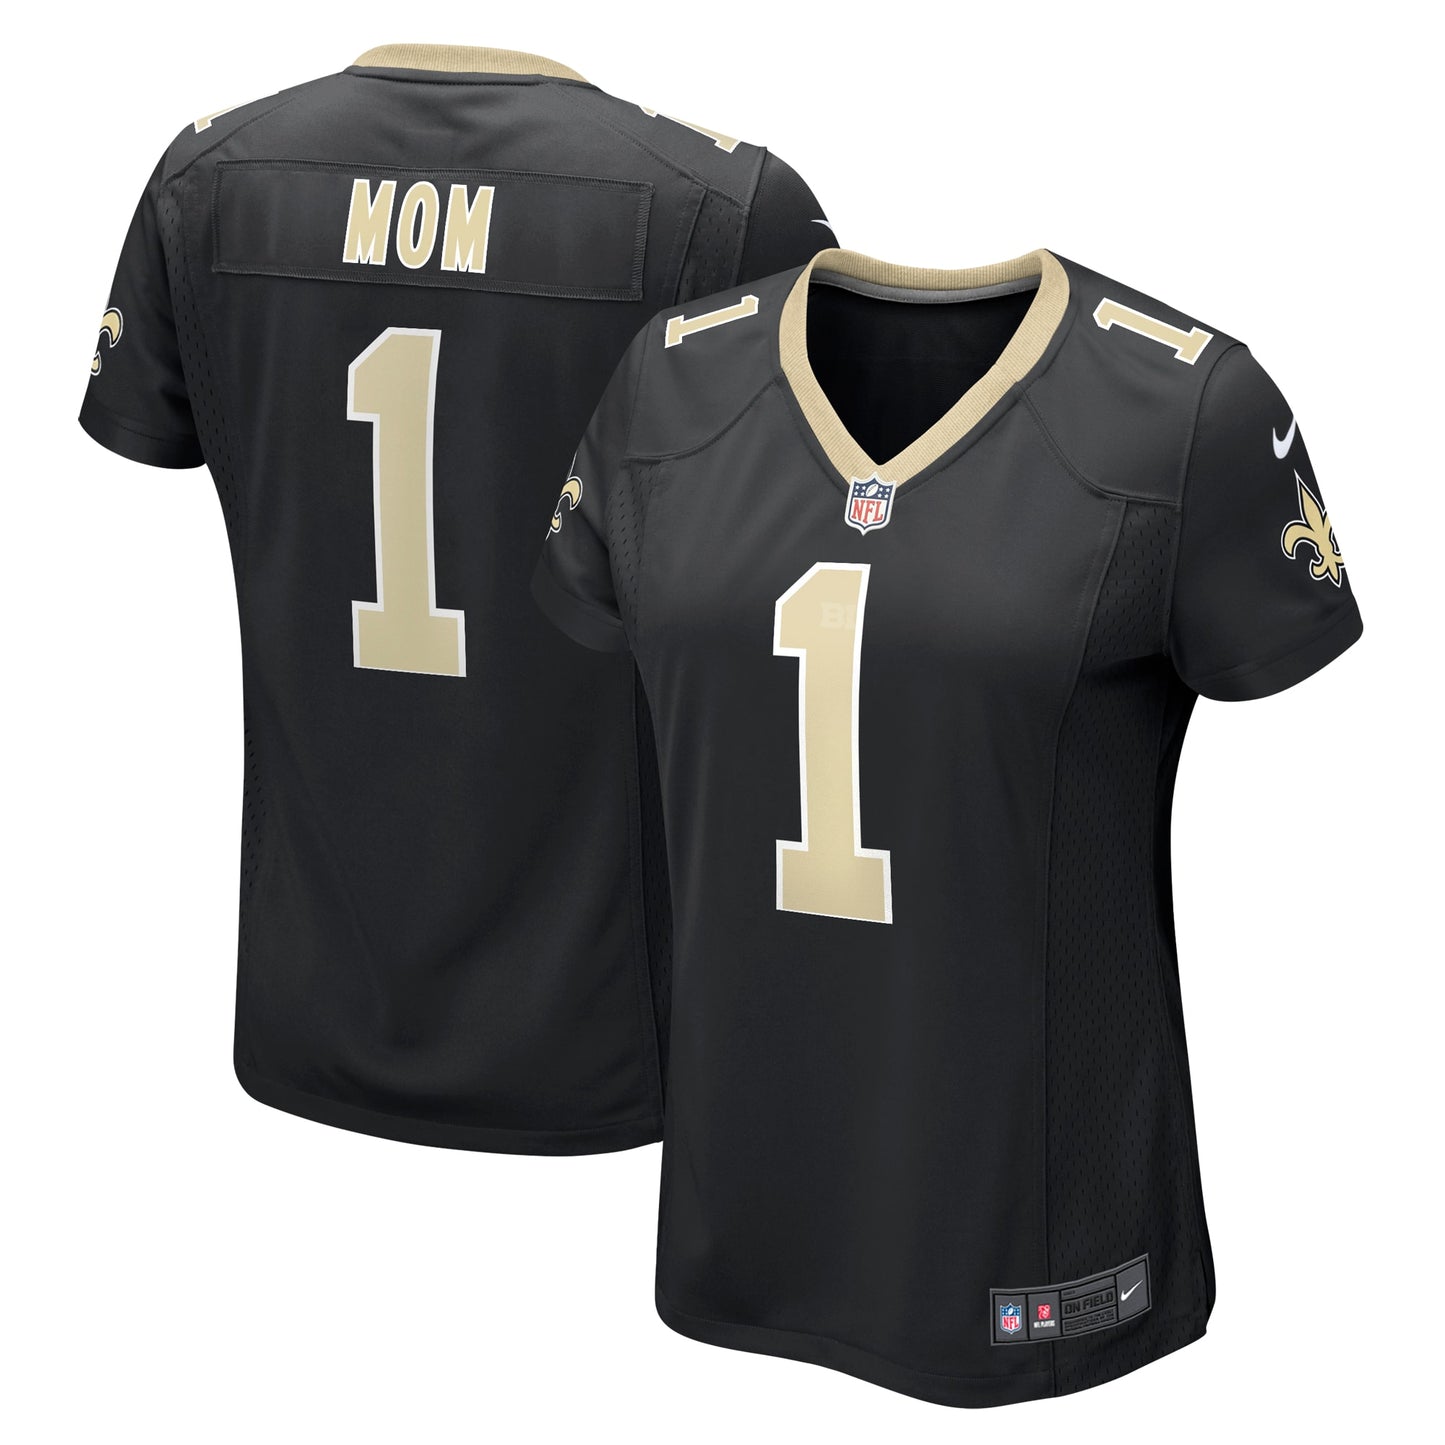 Number 1 Mom New Orleans Saints Nike Women's Game Jersey - Black